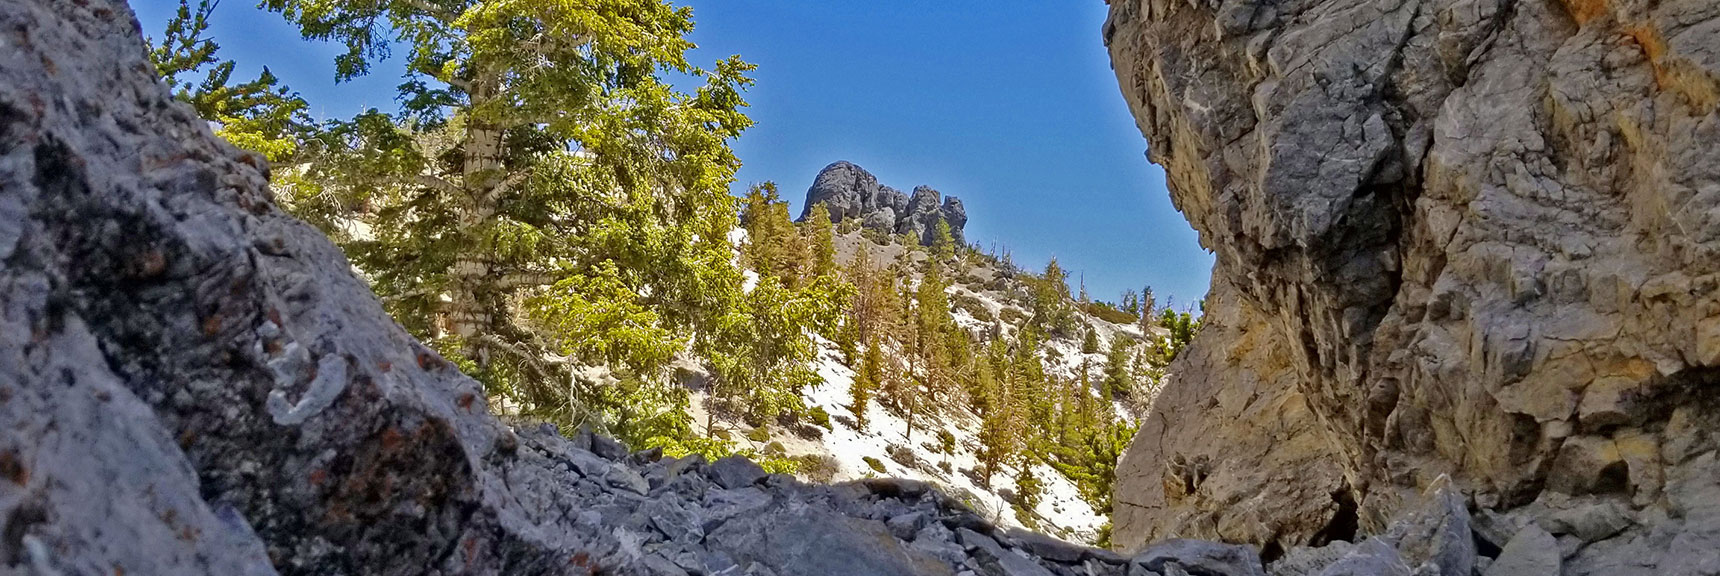 View Through the Arch to Black Rock Sister | Black Rock Sister | Mt Charleston Wilderness | Lee Canyon | Spring Mountains, Nevada